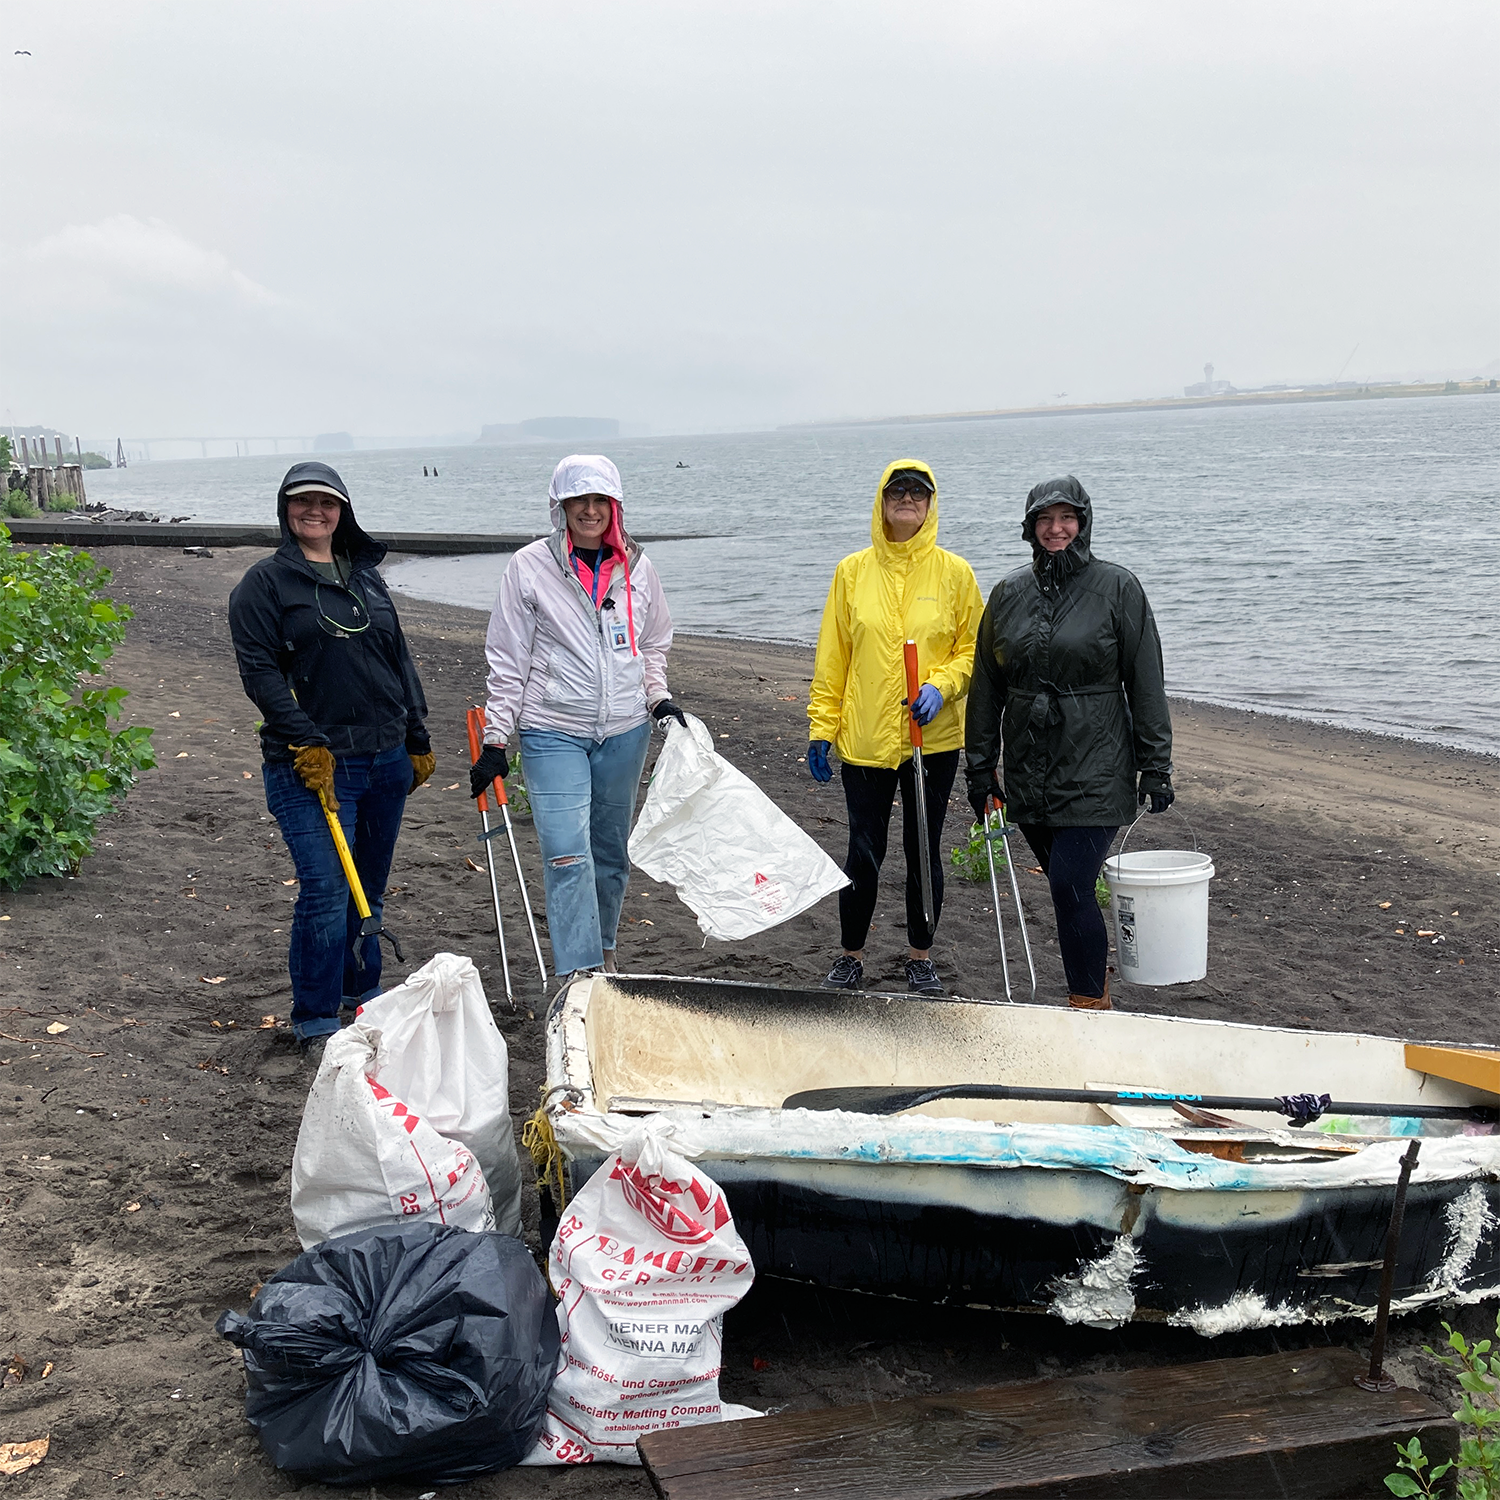 volunteers cleaning up the beach along the Columbia River